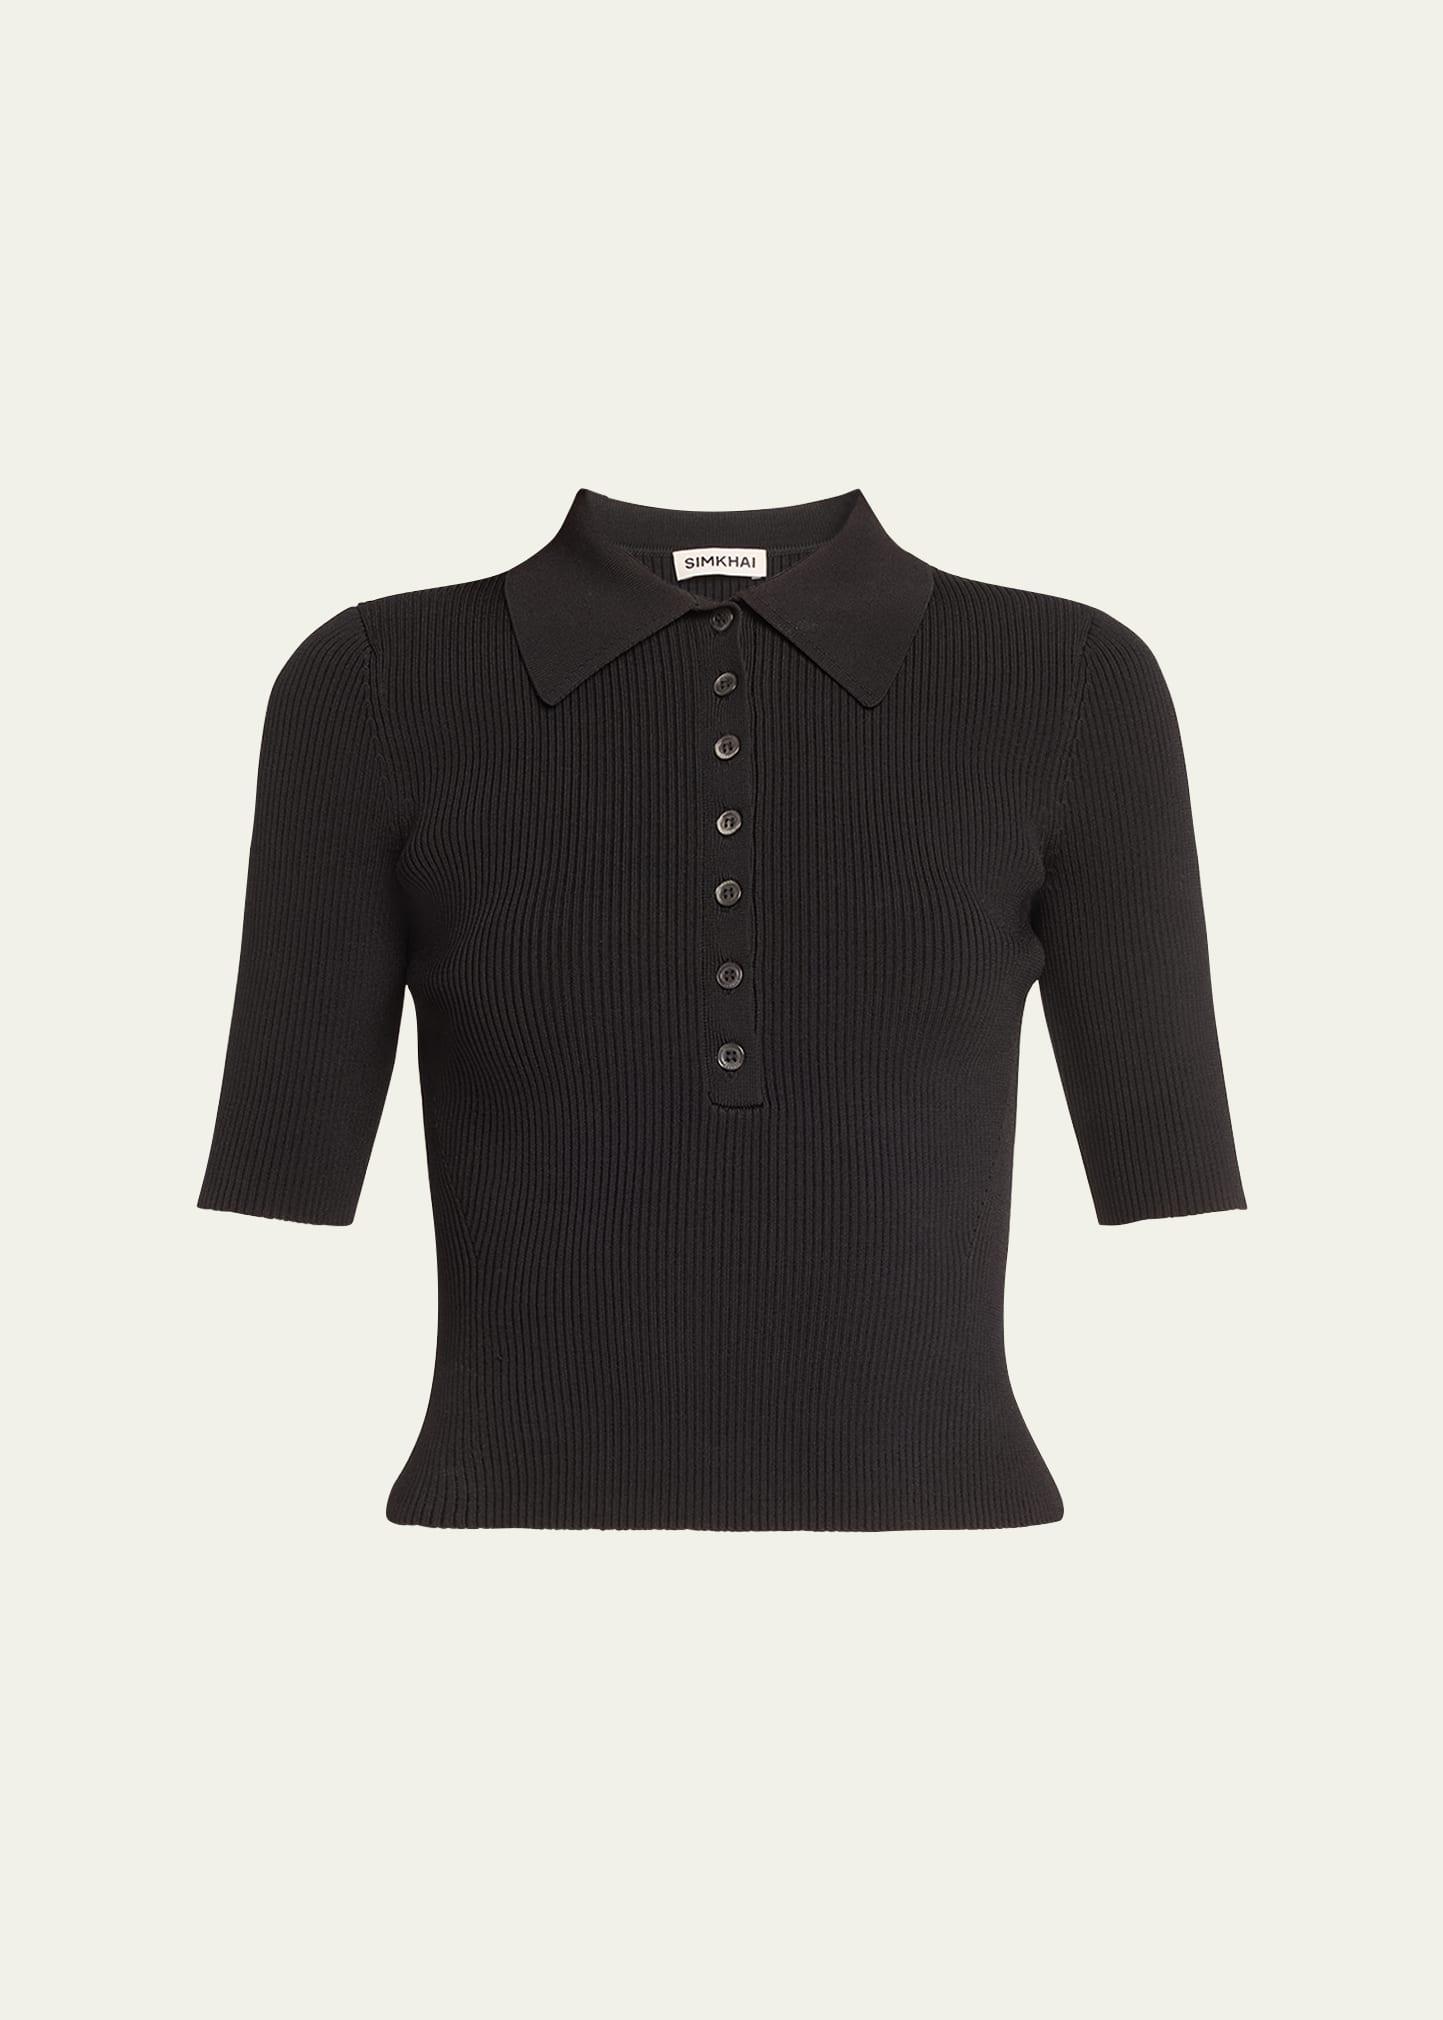 Womens Secily Henley Top Product Image